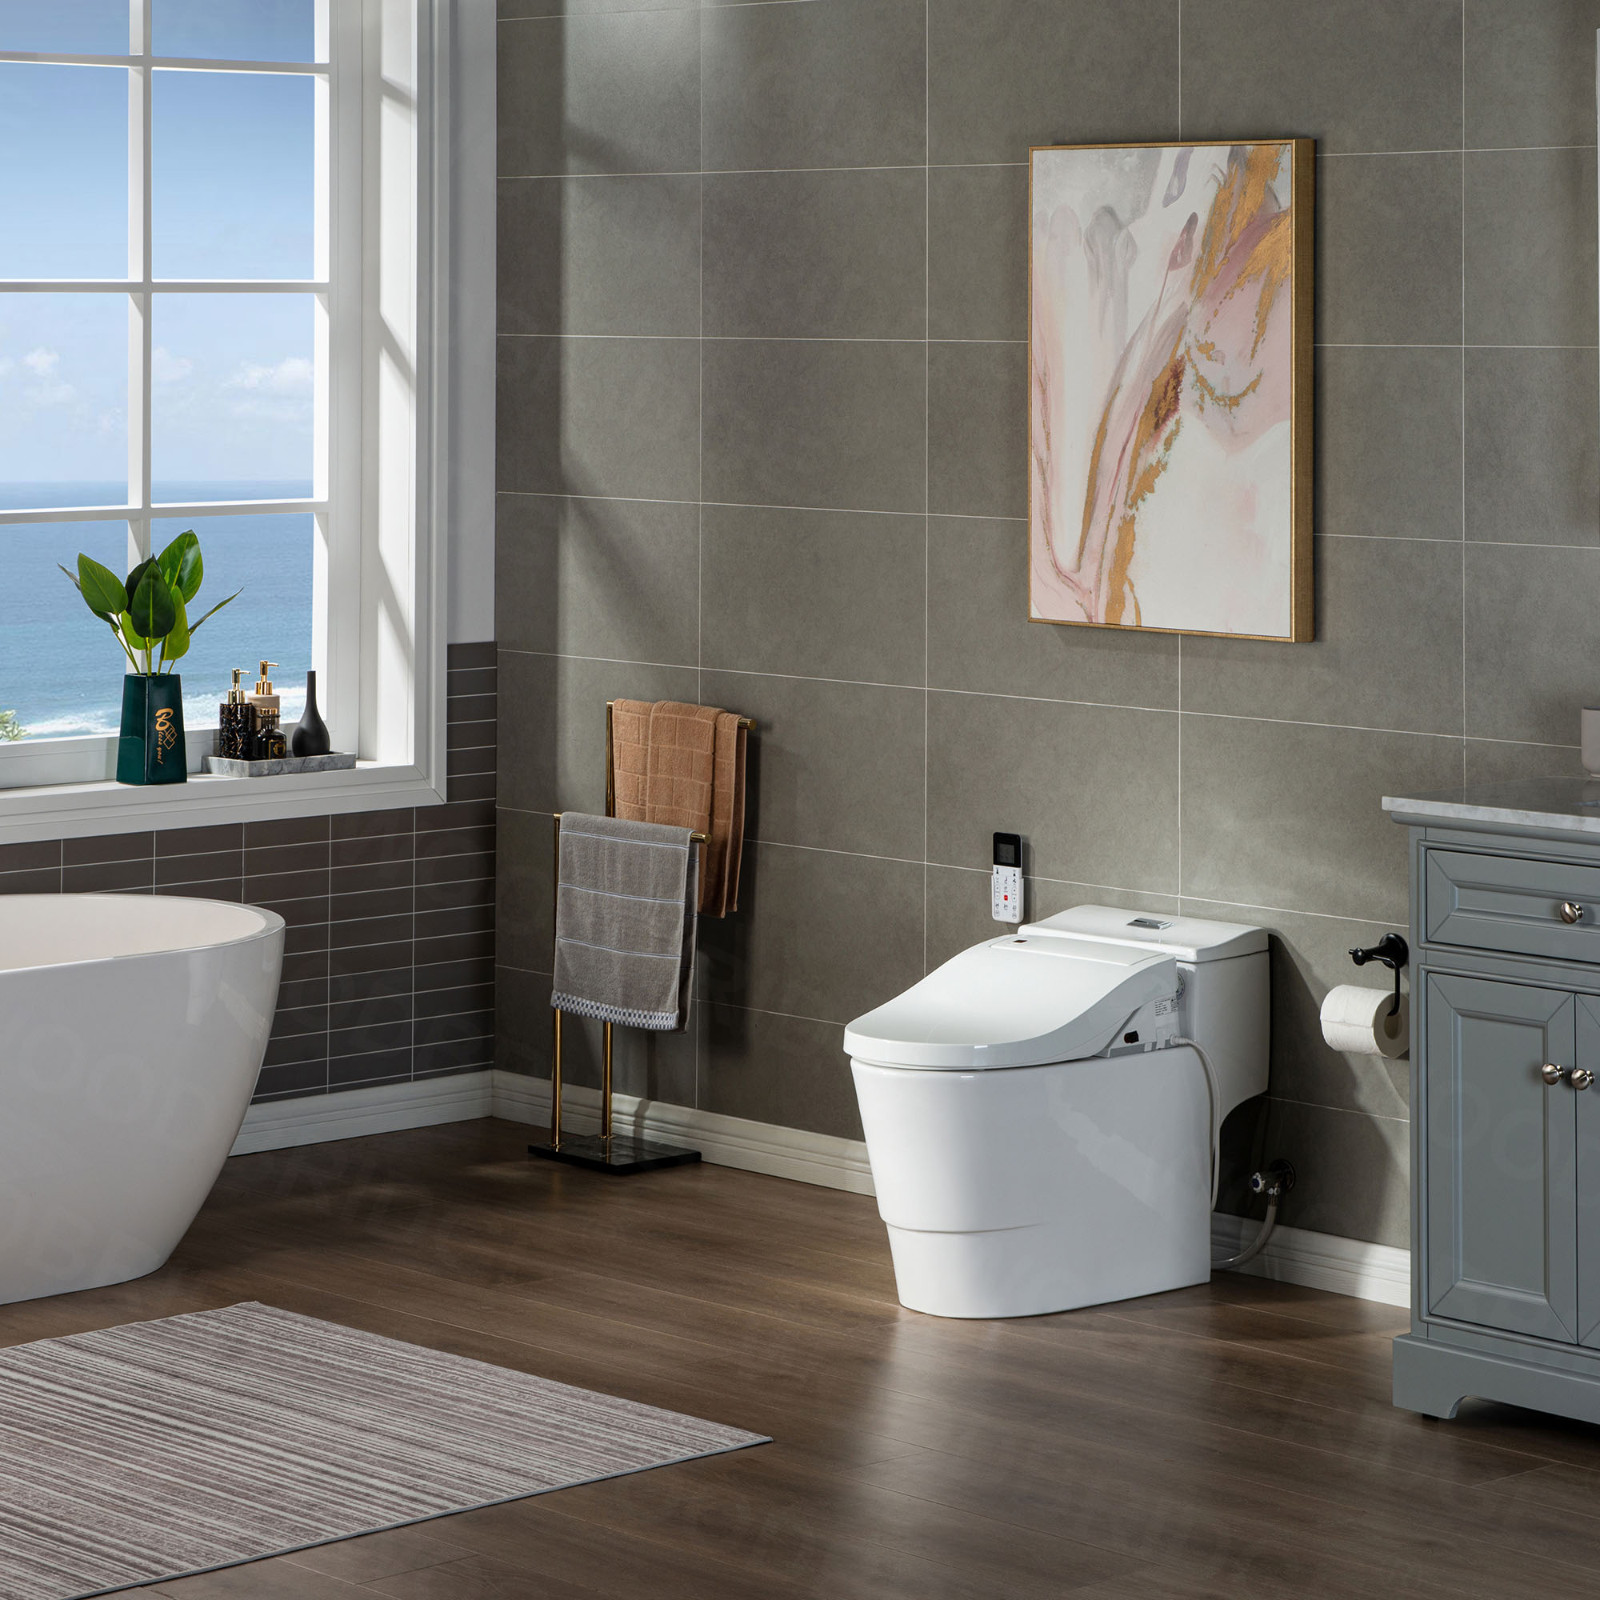  WOODBRIDGE Toilet & Bidet Luxury Elongated One Piece Advanced Smart Seat with Temperature Controlled Wash Functions and Air Dryer, Toilet with Bidet. T-0737, Bidet & Toilet_9721